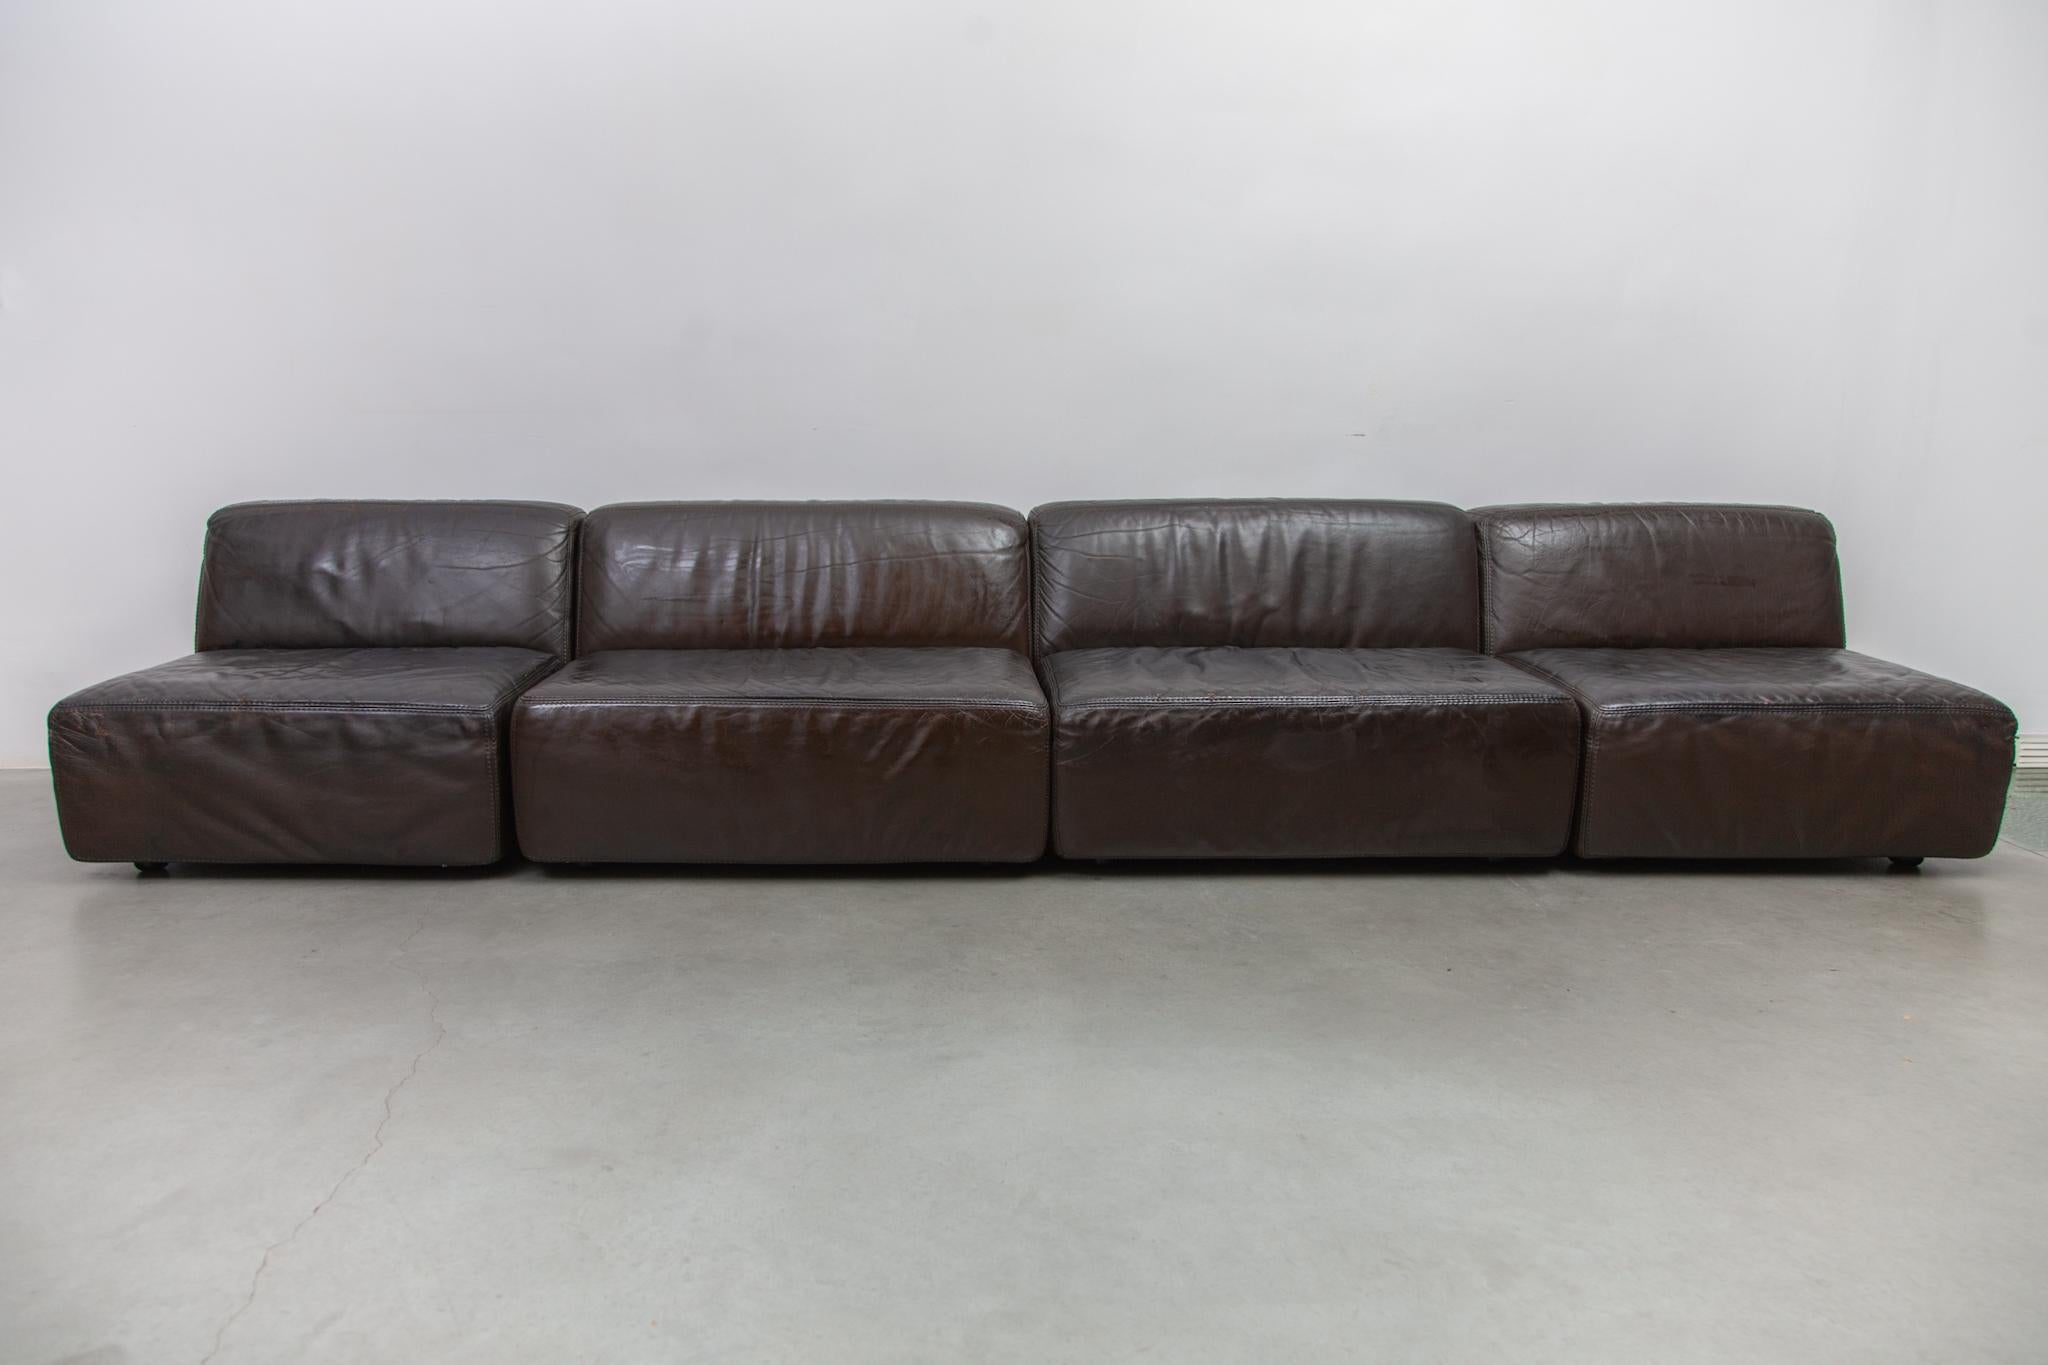 Beautiful modular sofa, manufactured by Durlet, Belgium, 1970s. The design is from the hand of Anita Schmidt. Schmidt has been working together with Durlet since the founding of the company in 1966. Form, function and ergonomics are the goals to